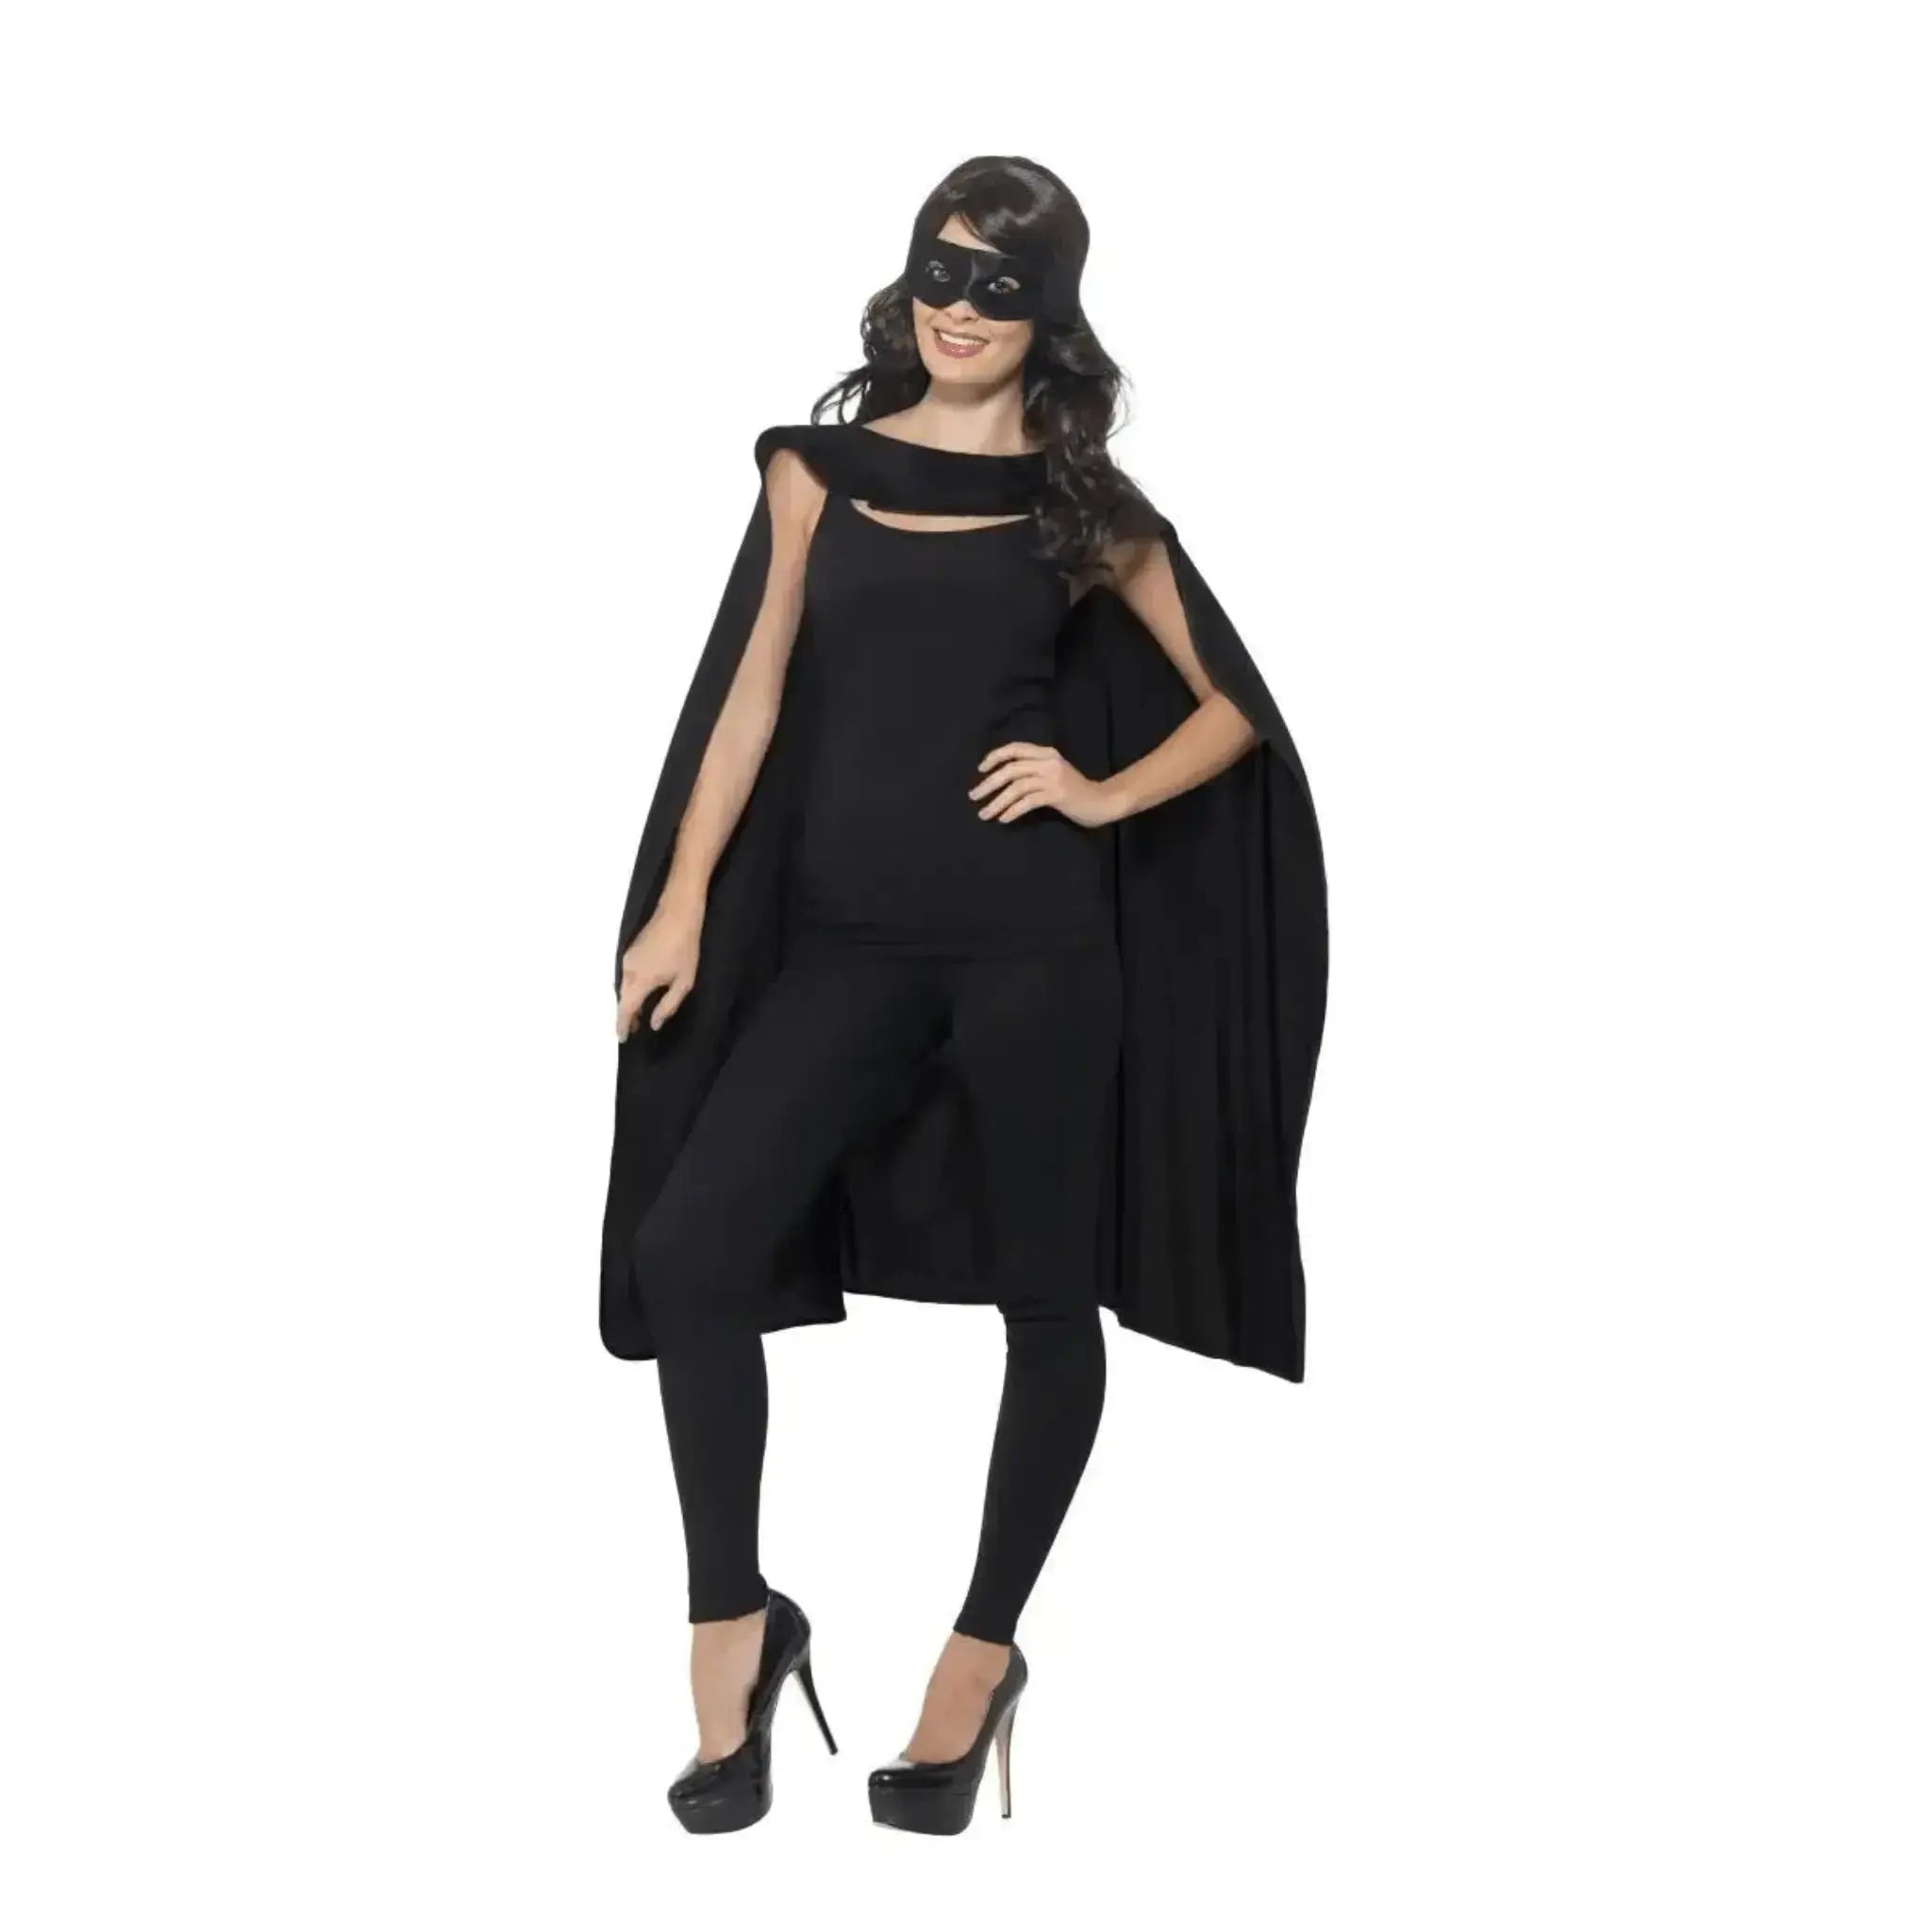 Superhero Capes with Eyemasks | The Party Hut